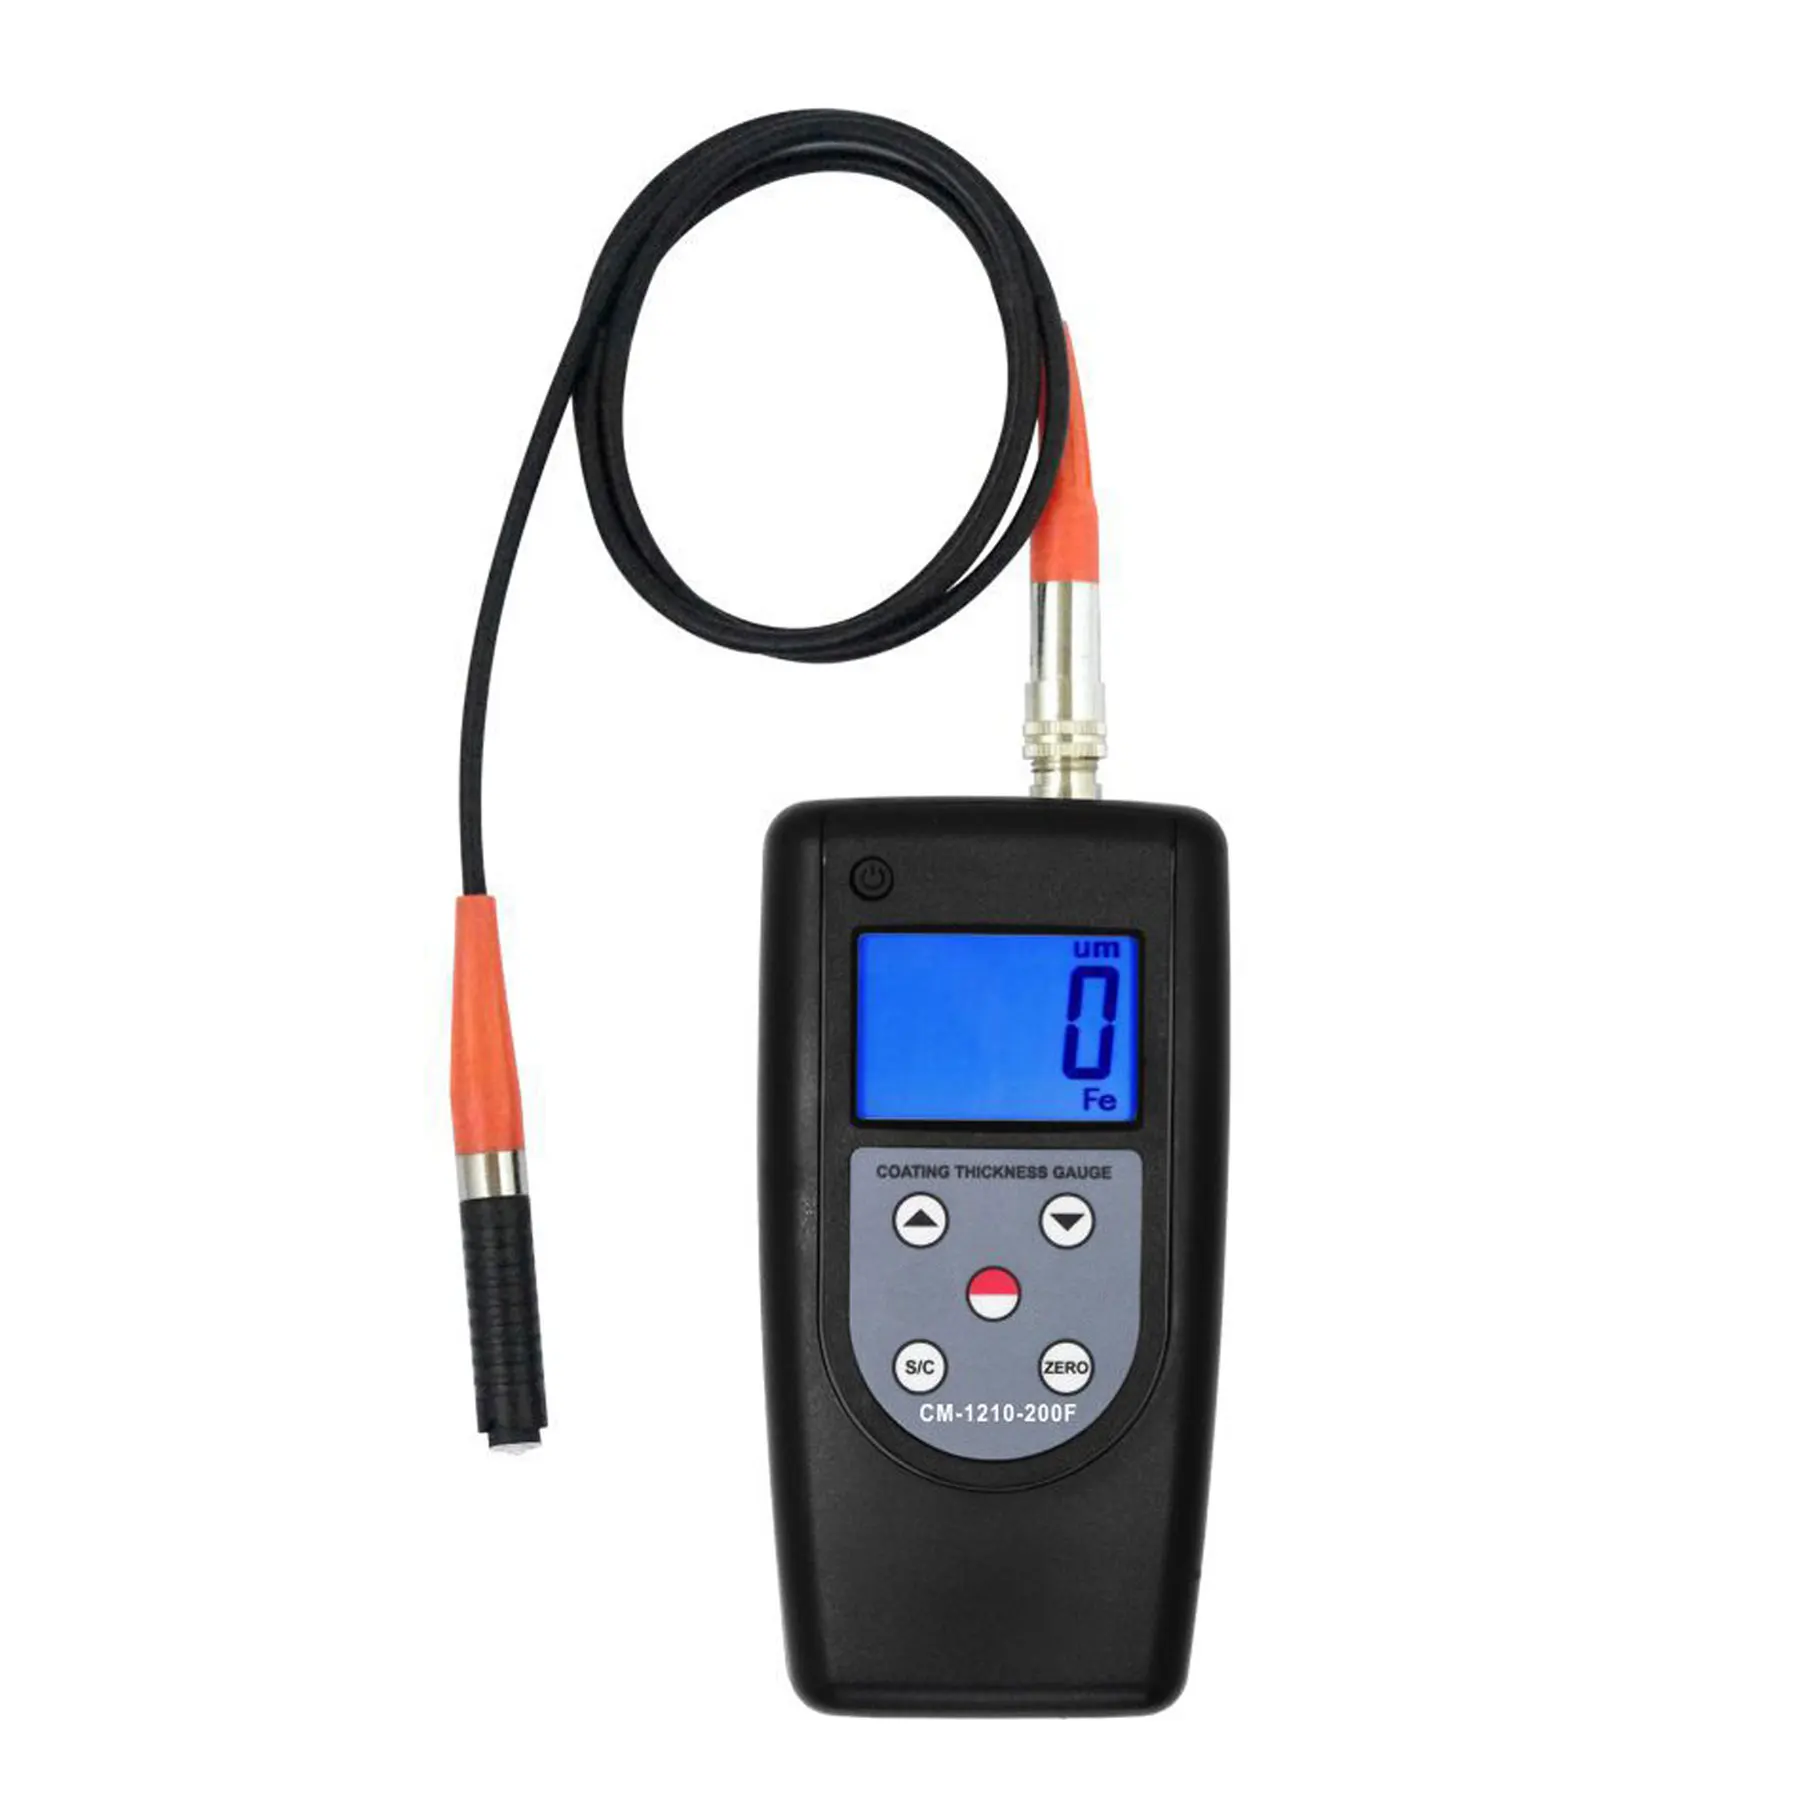 

Micro Coating Thickness Gauge CM-1210-200F for the thickness measurement of coating on small workpiece